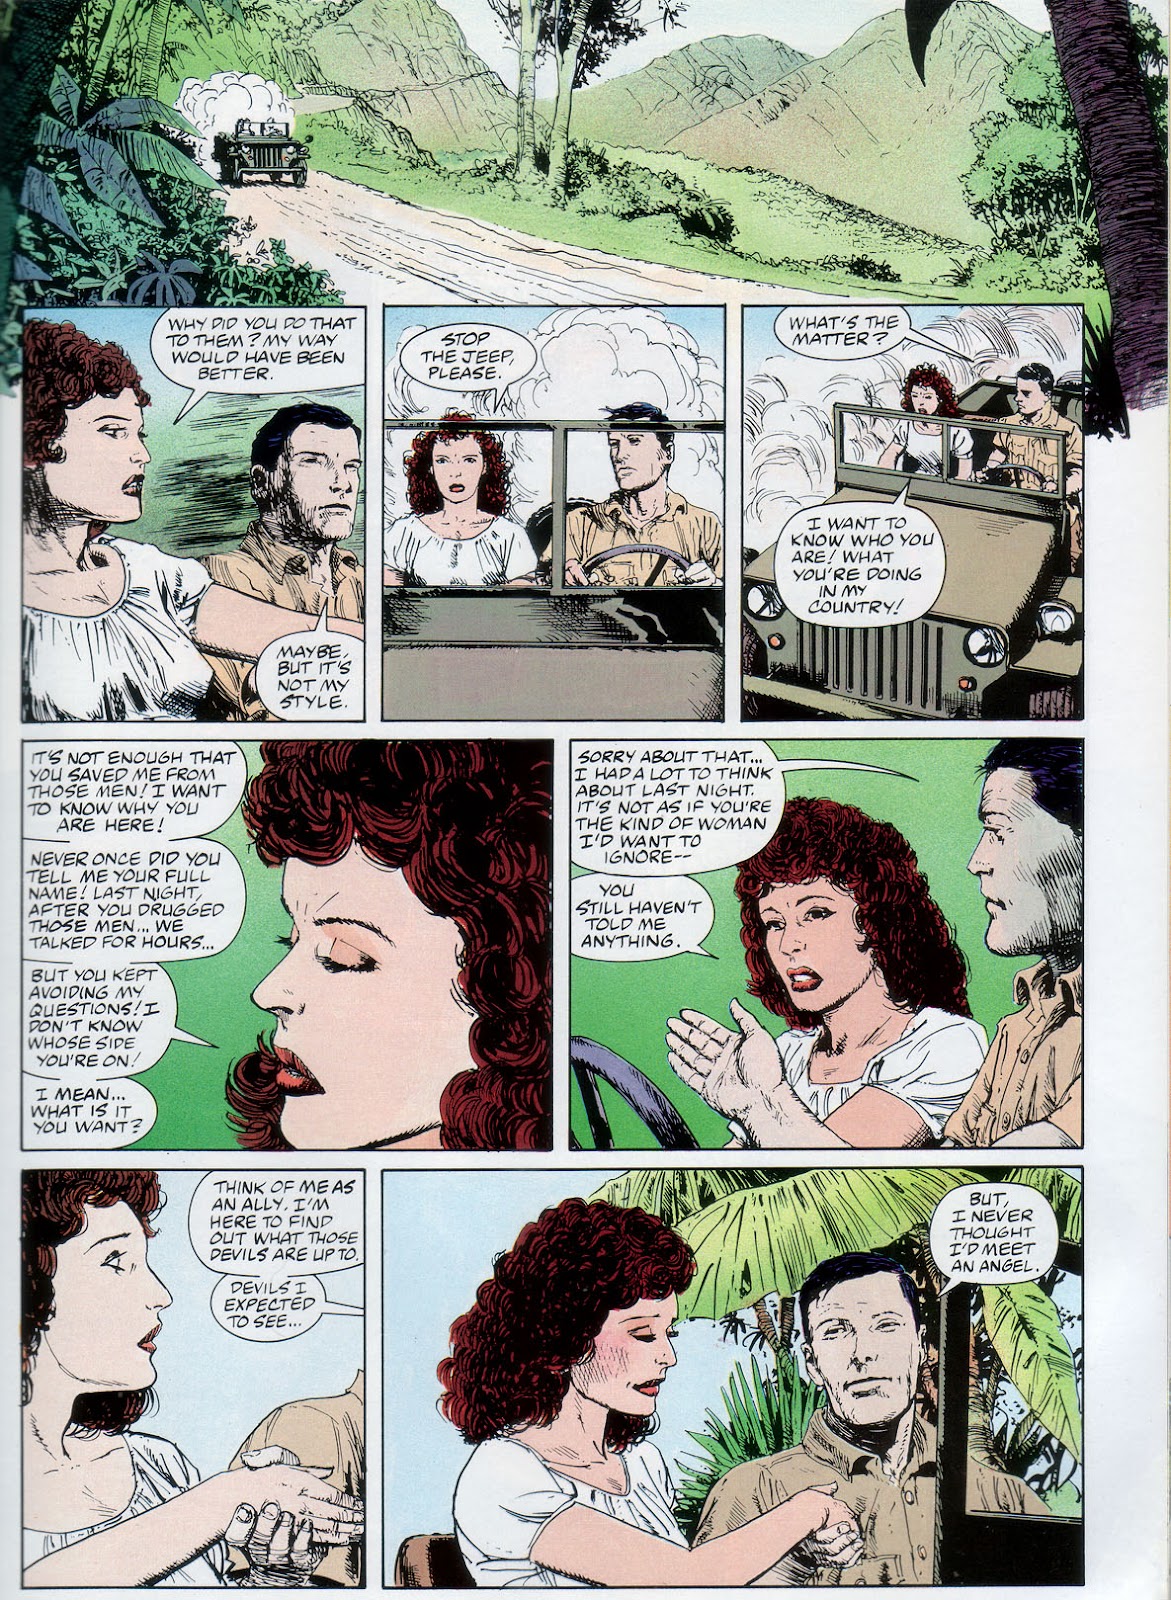 Marvel Graphic Novel issue 57 - Rick Mason - The Agent - Page 45